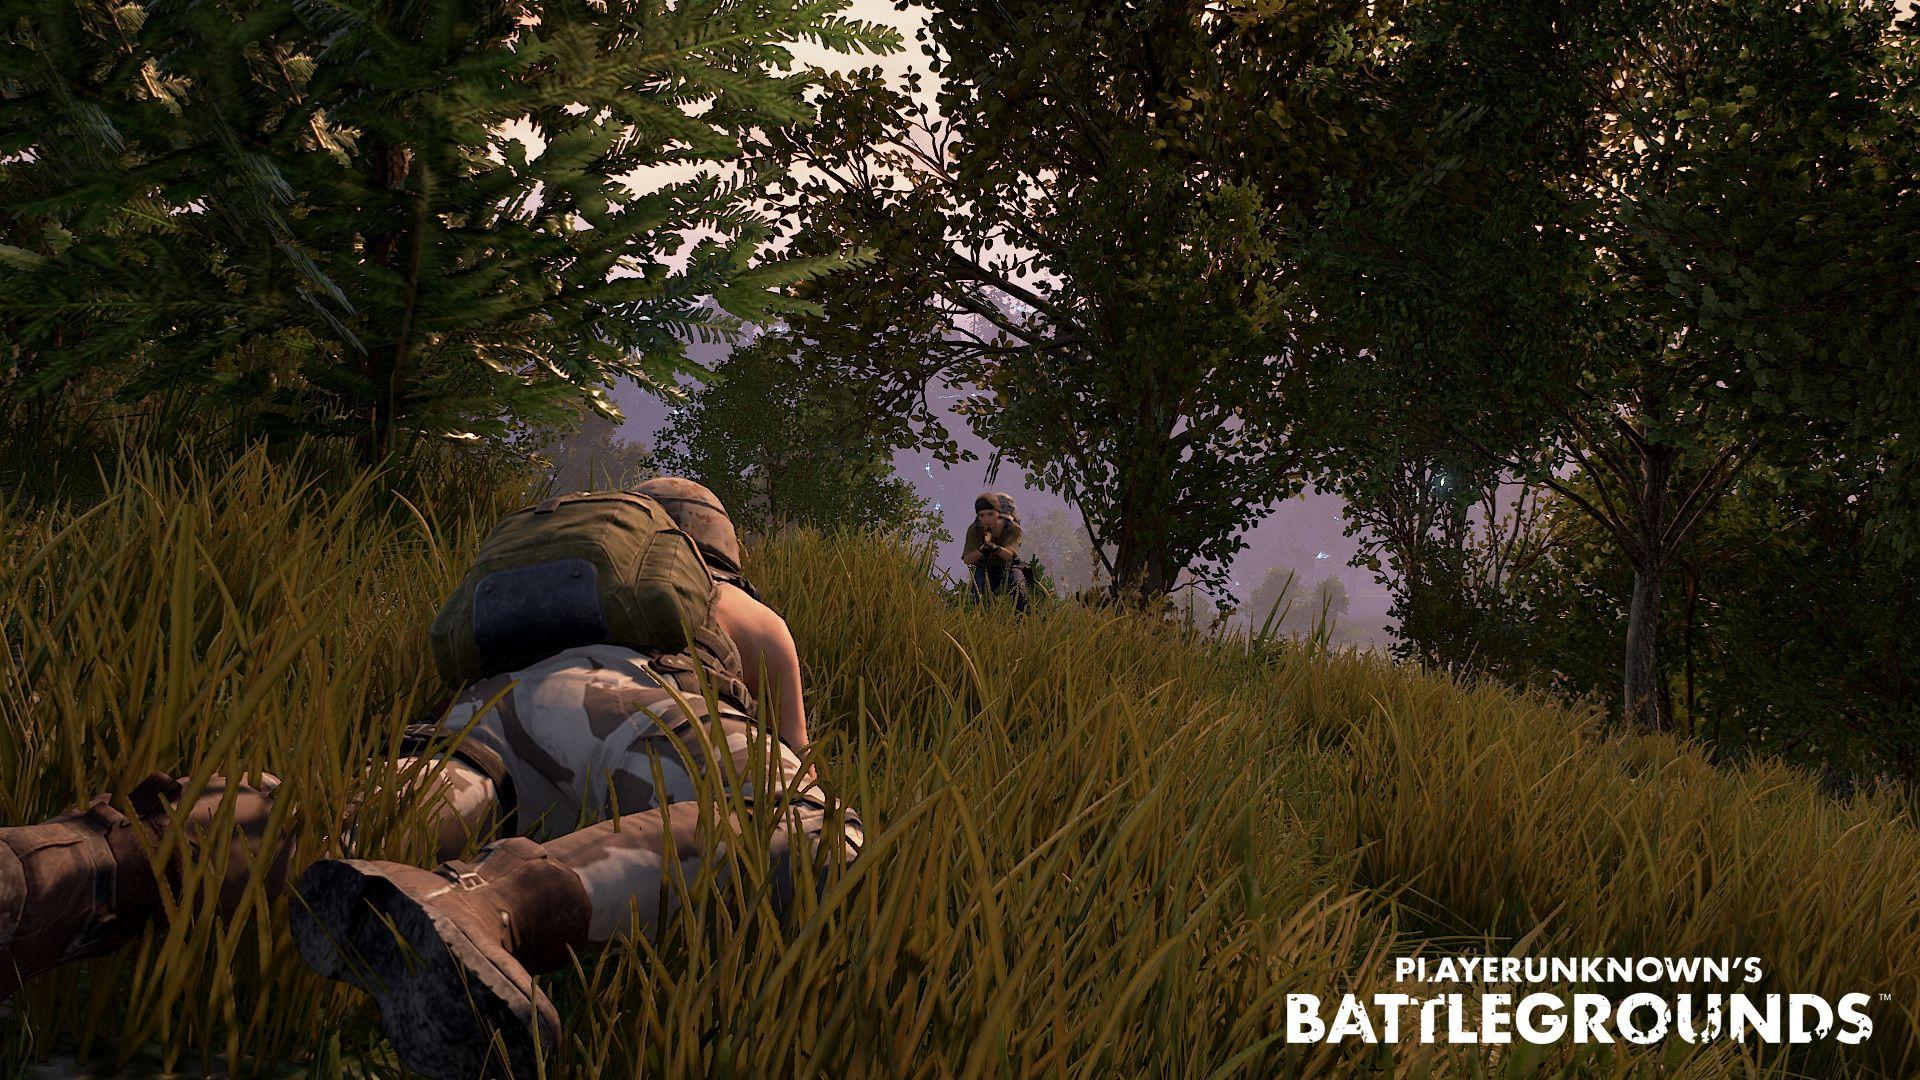 PLAYERUNKNOWN'S BATTLEGROUNDS Wallpapers, Pictures, Image